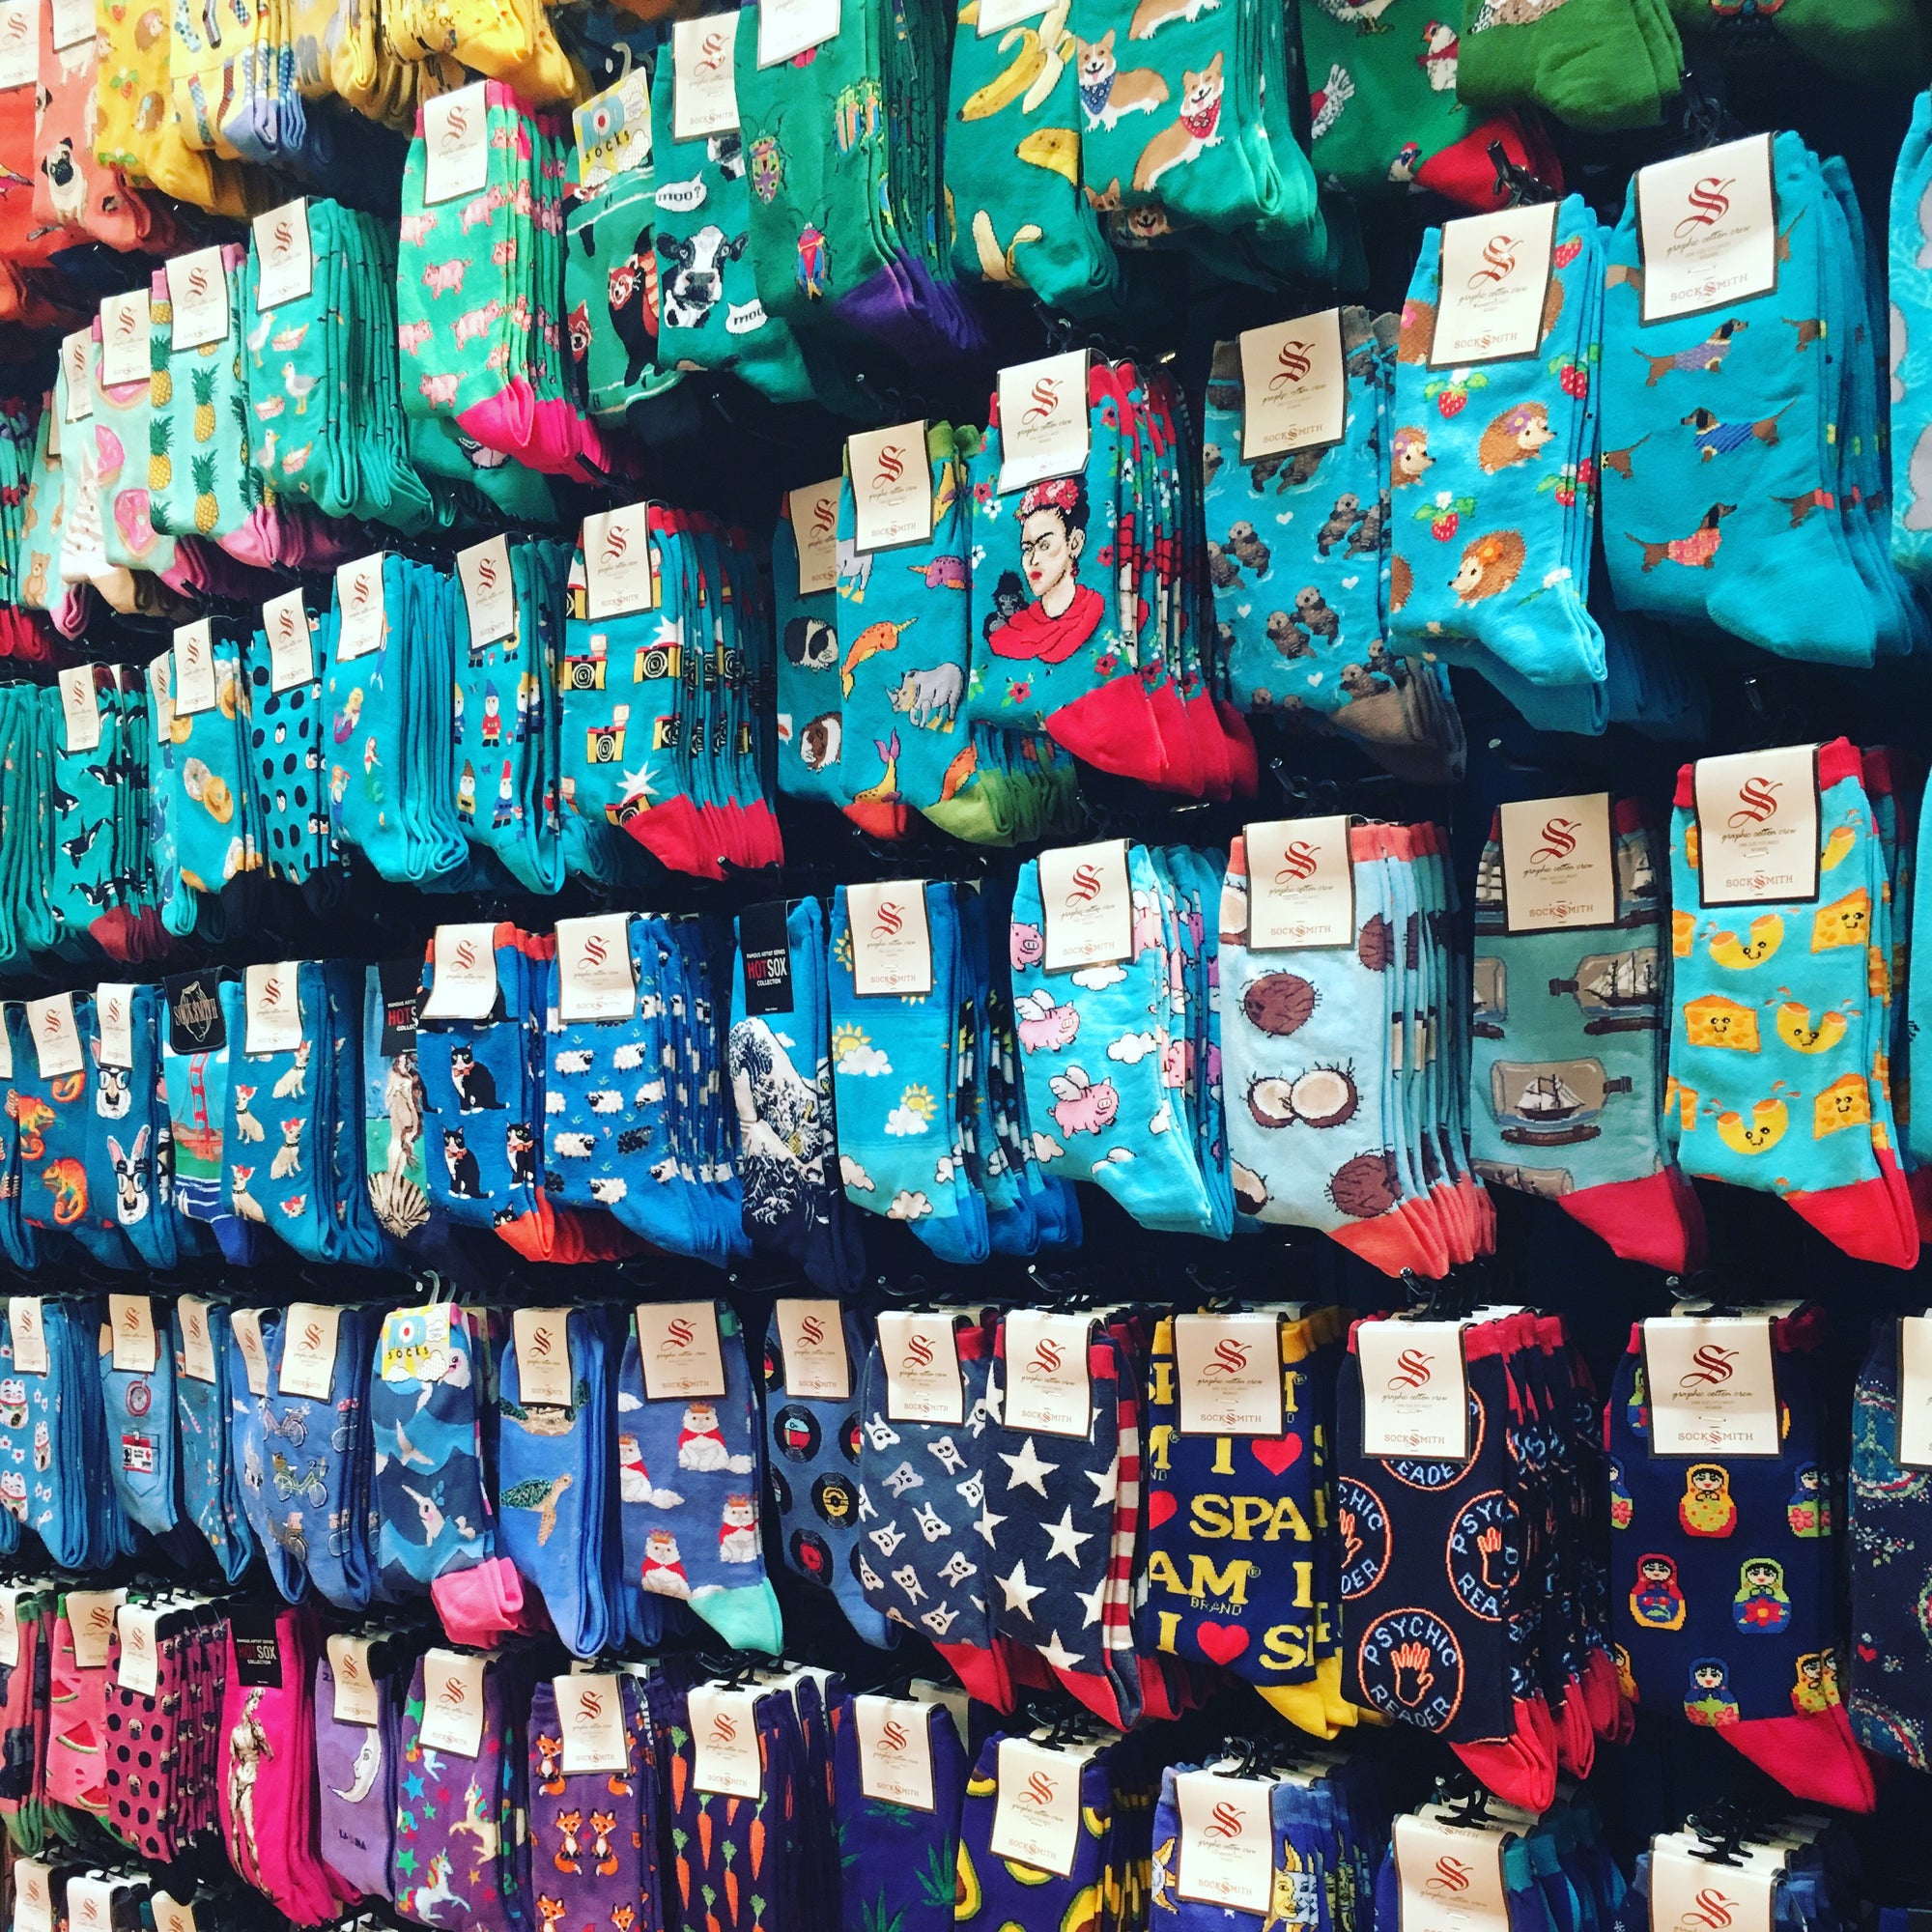 Women's novelty crew socks in a rainbow of colors featuring animals, art & food themes.